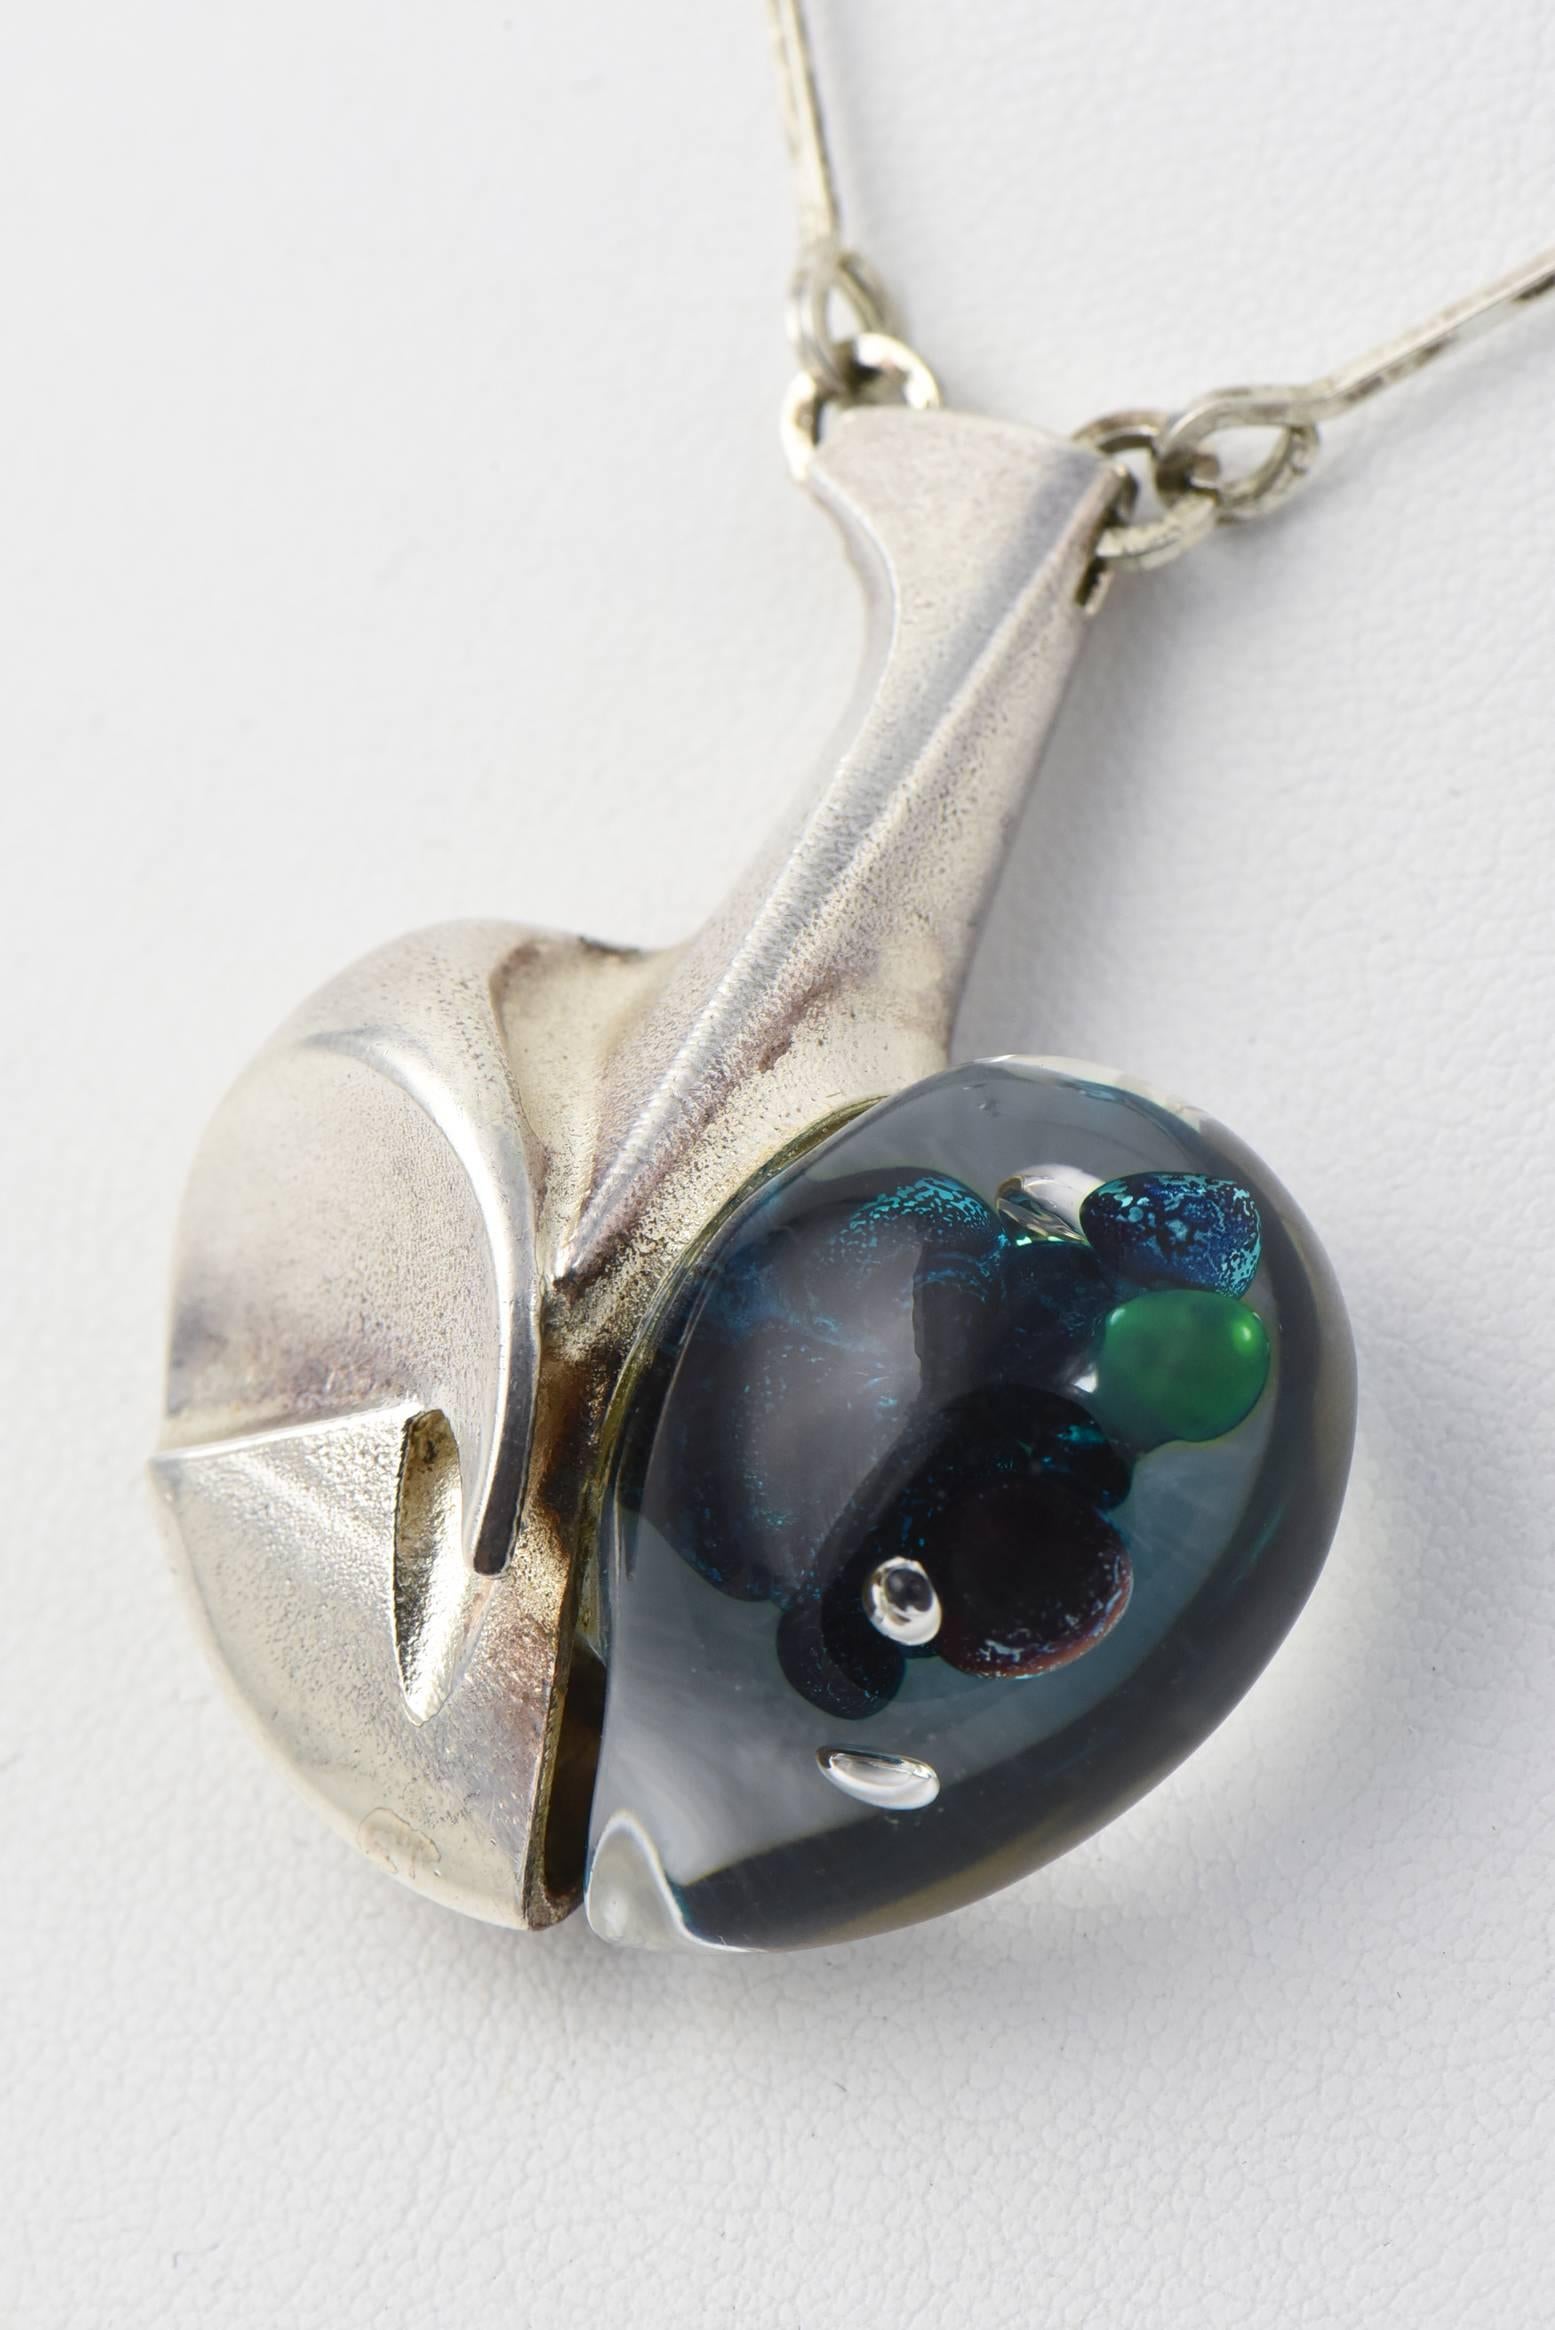 Original 1970's 
Very rare & beautiful space age silver necklace by Finnish silversmith Björn Weckström. Made for his Lapponia workshop in 1972.  
A remarkable pendant by Finnish designer Björn Weckström.  He was inspired by science fiction